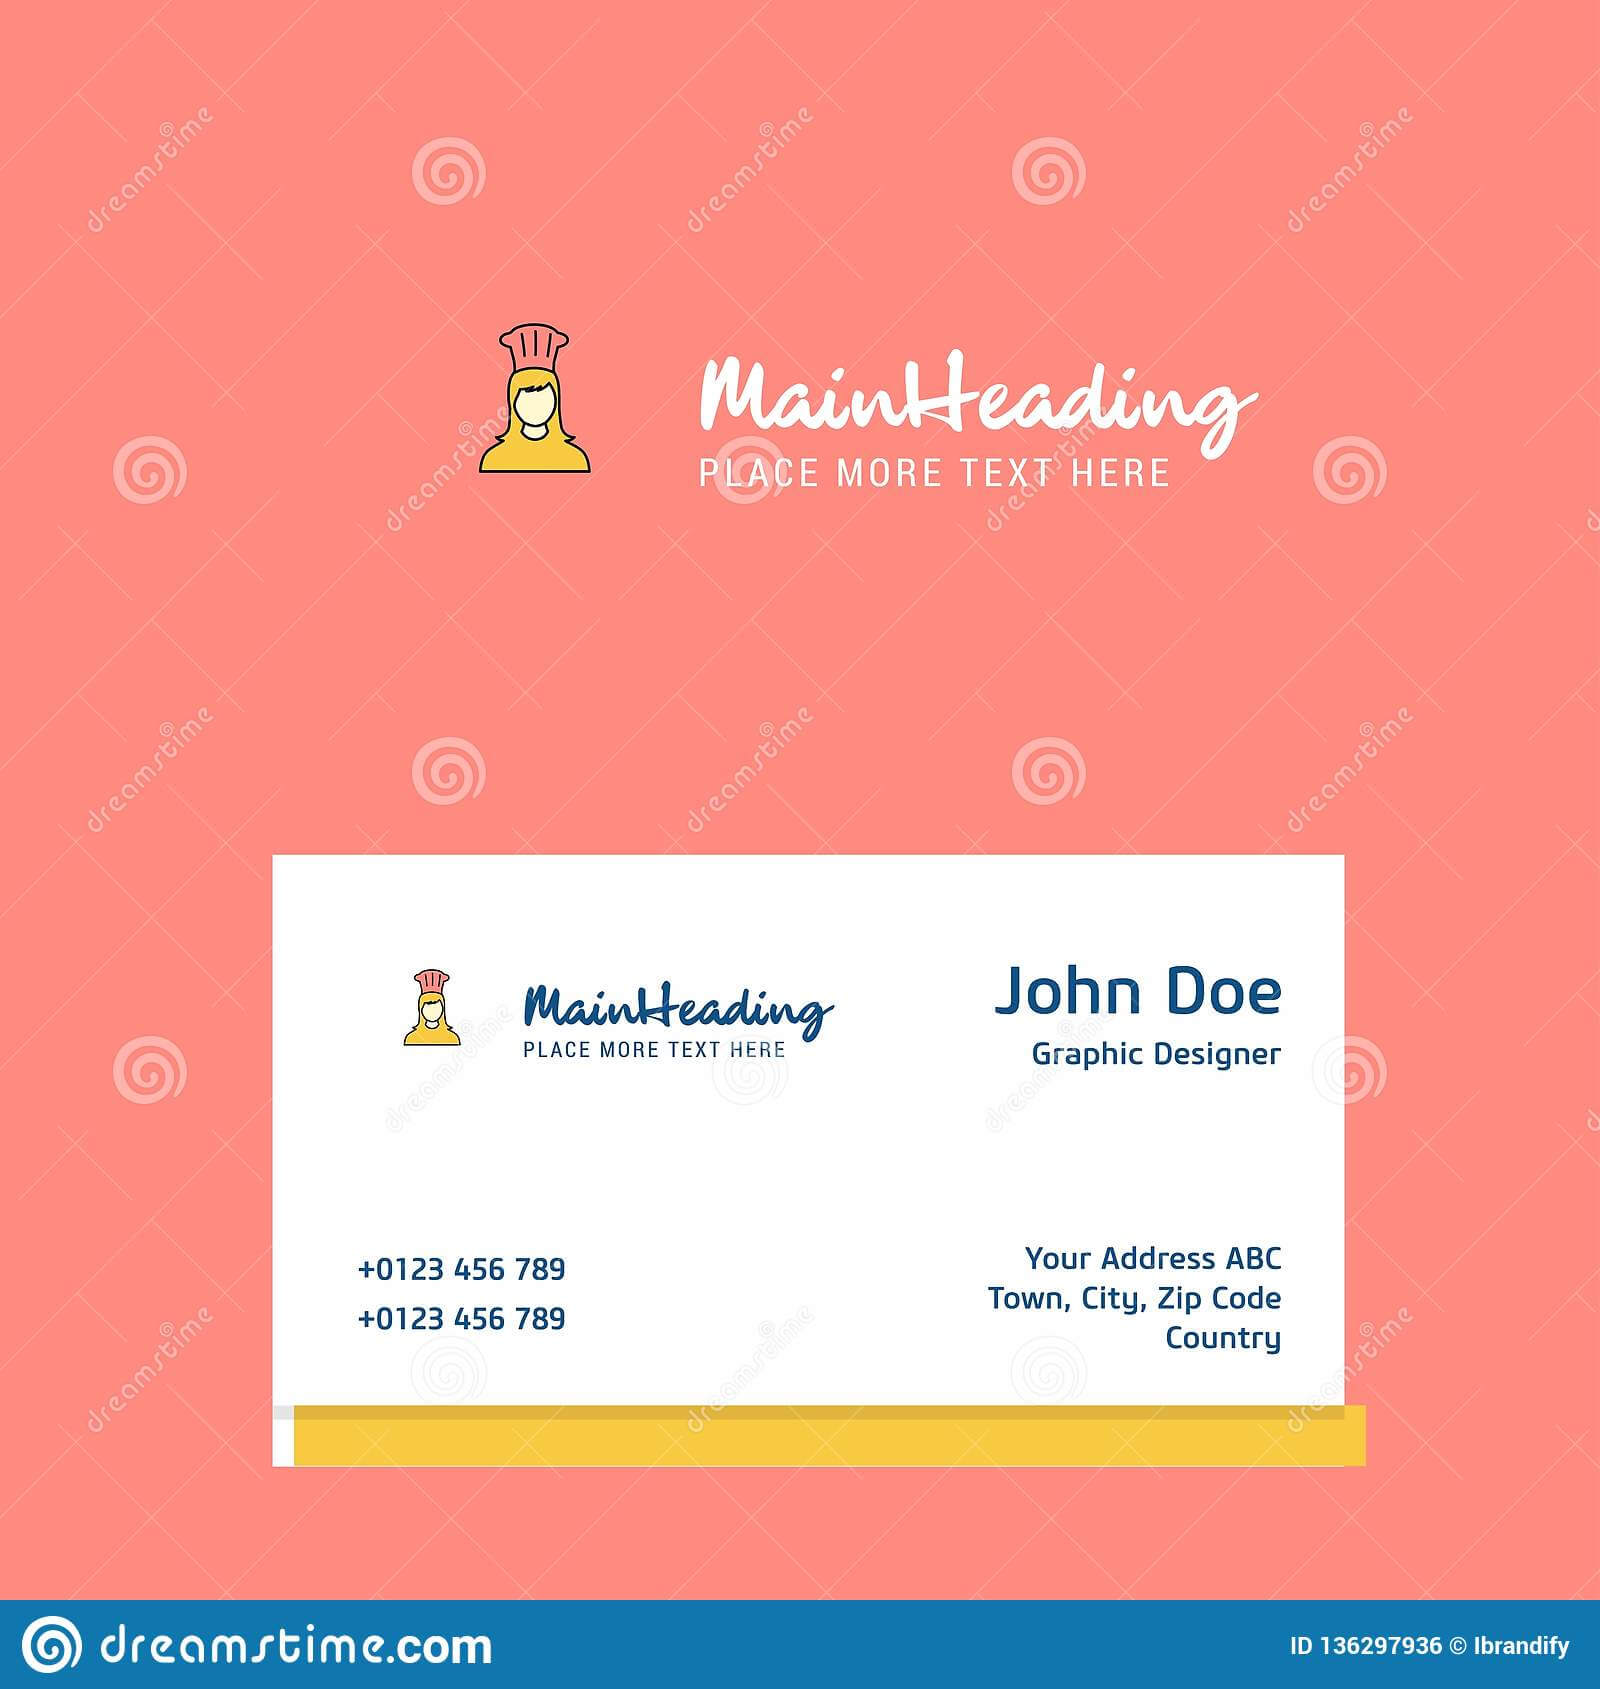 Chef Logo Design With Business Card Template. Elegant Intended For Media Id Card Templates